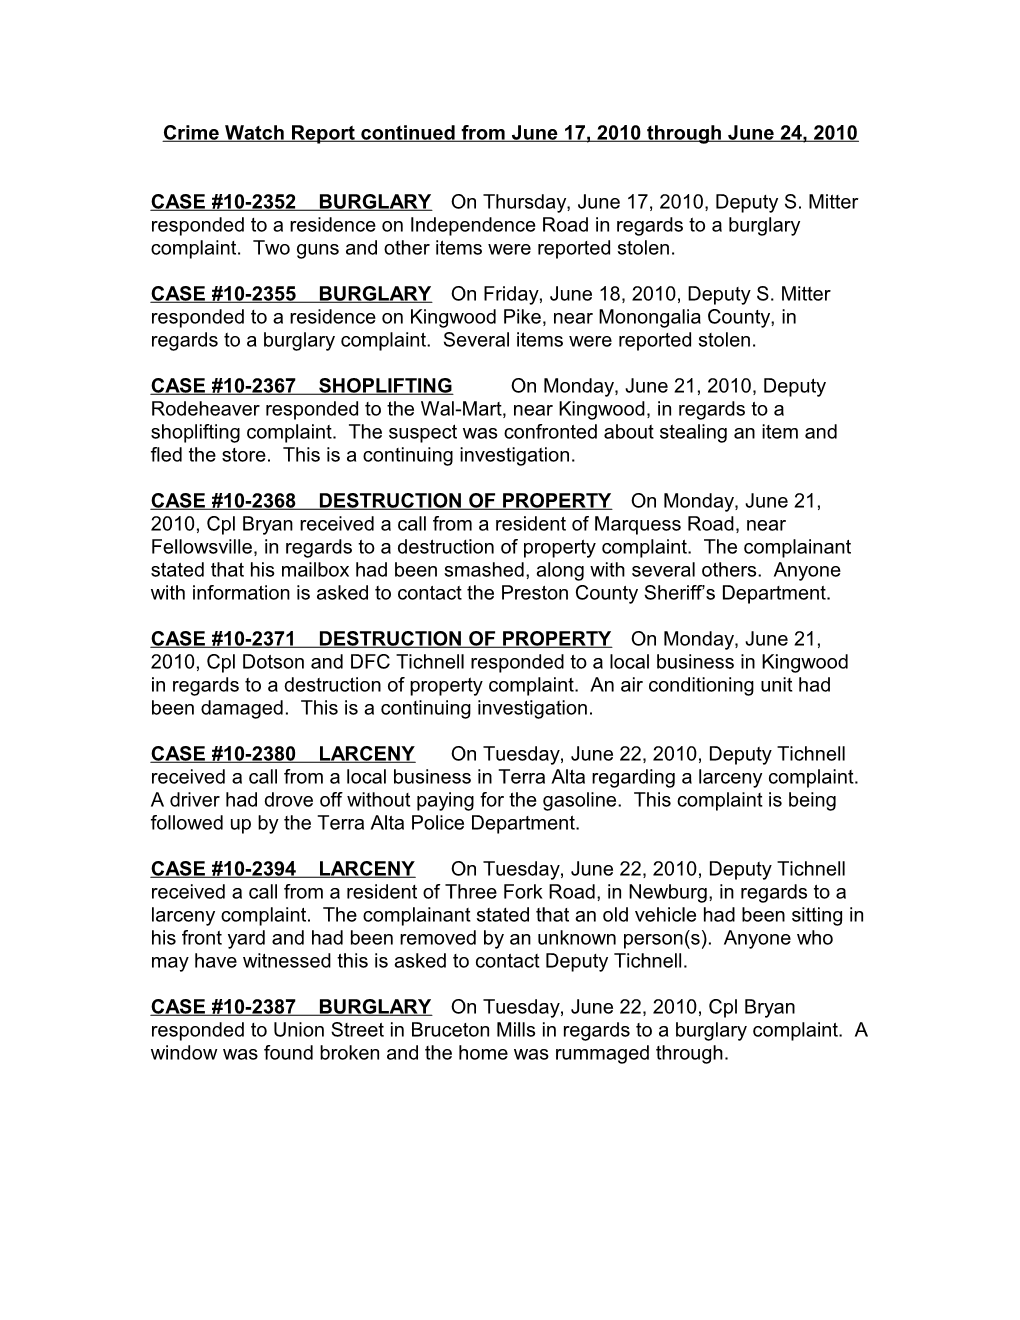 Crime Watch Report Continued from June 17, 2010 Through June 24, 2010